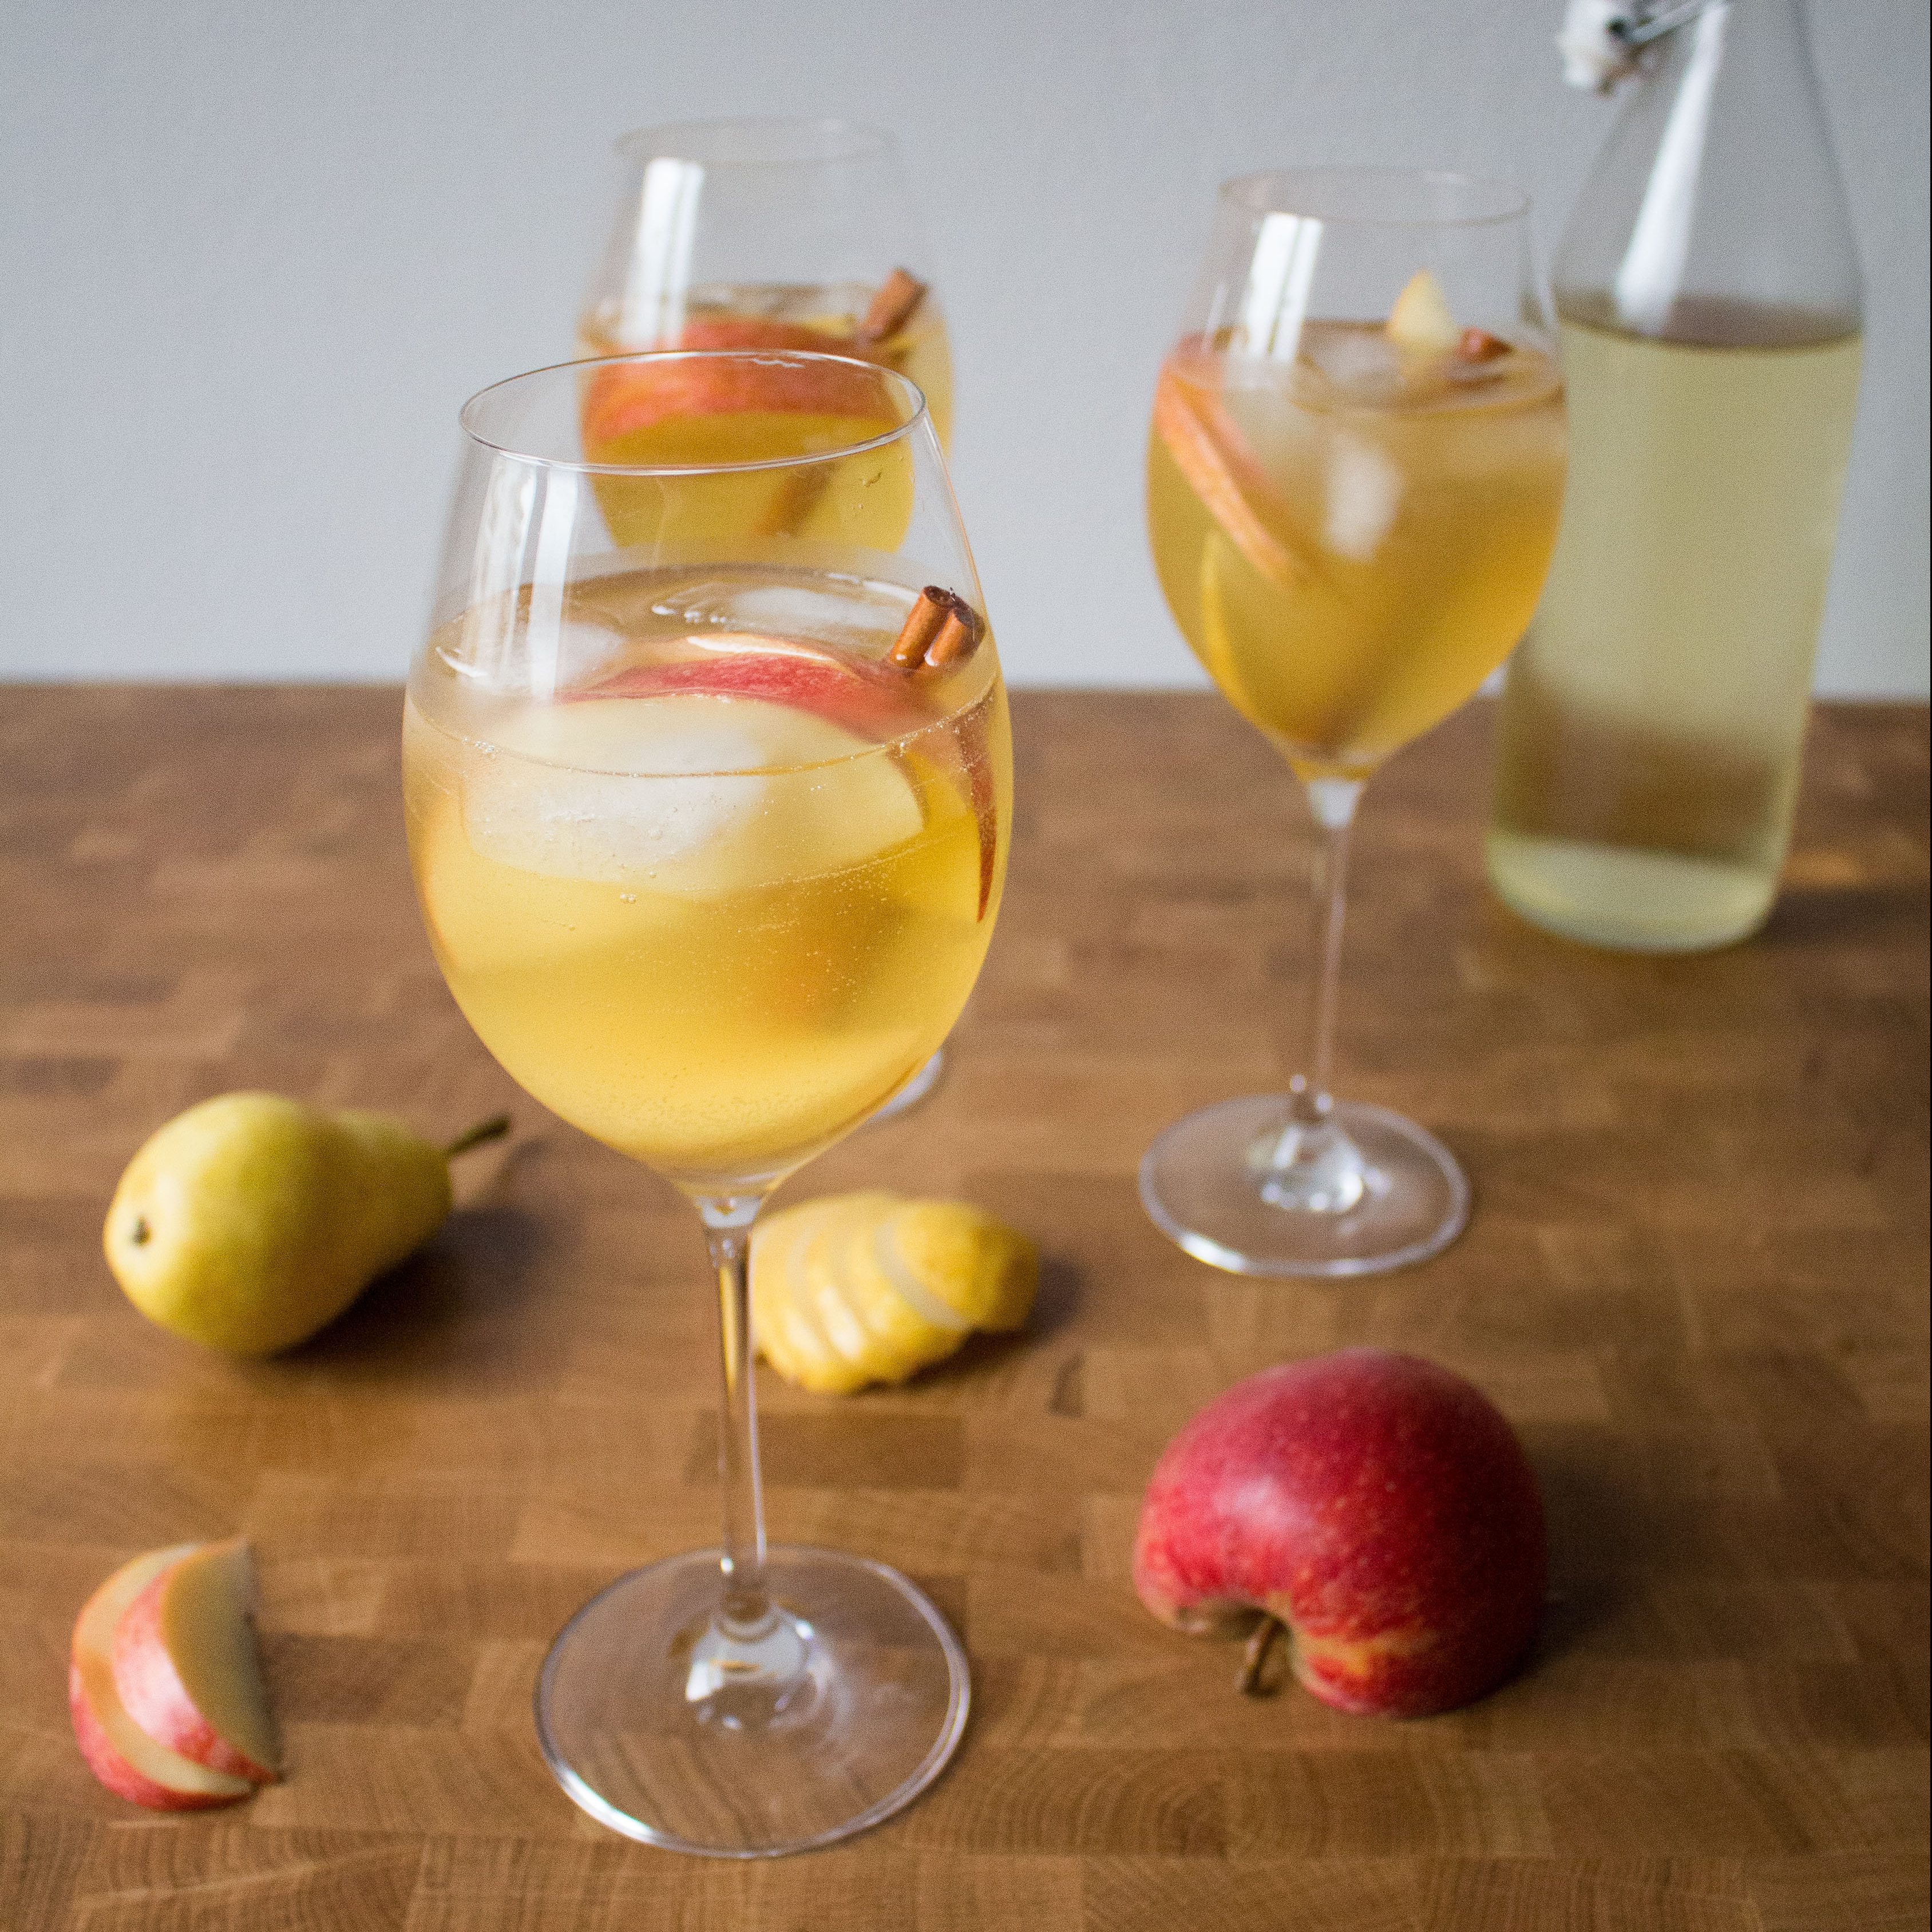 This fall prosecco cocktail will be the best thing you drink all autumn!